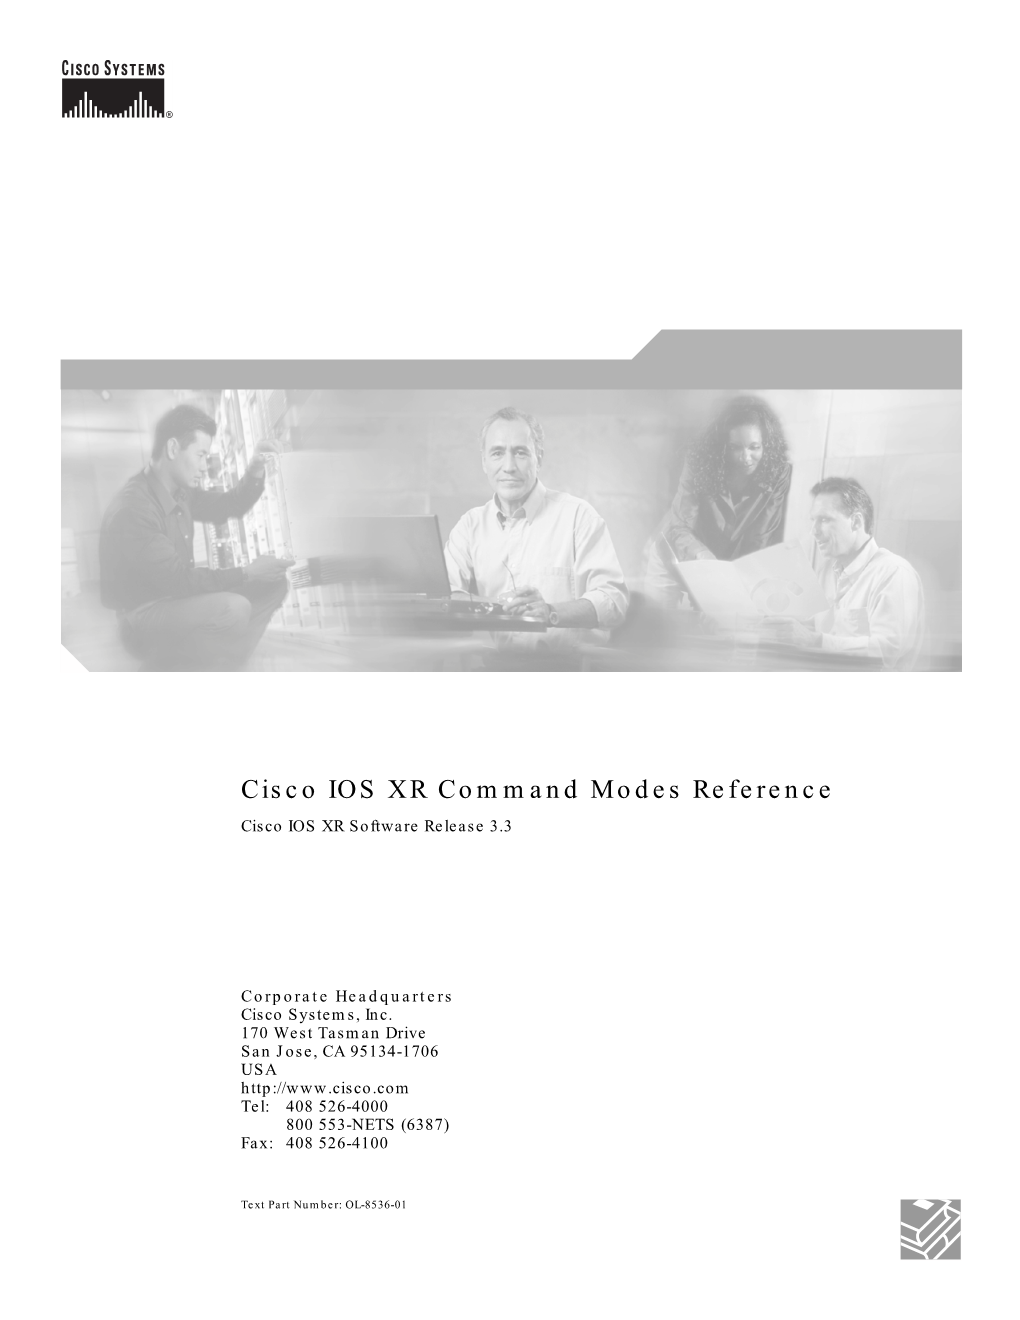 Cisco IOS XR Command Modes Reference Cisco IOS XR Software Release 3.3